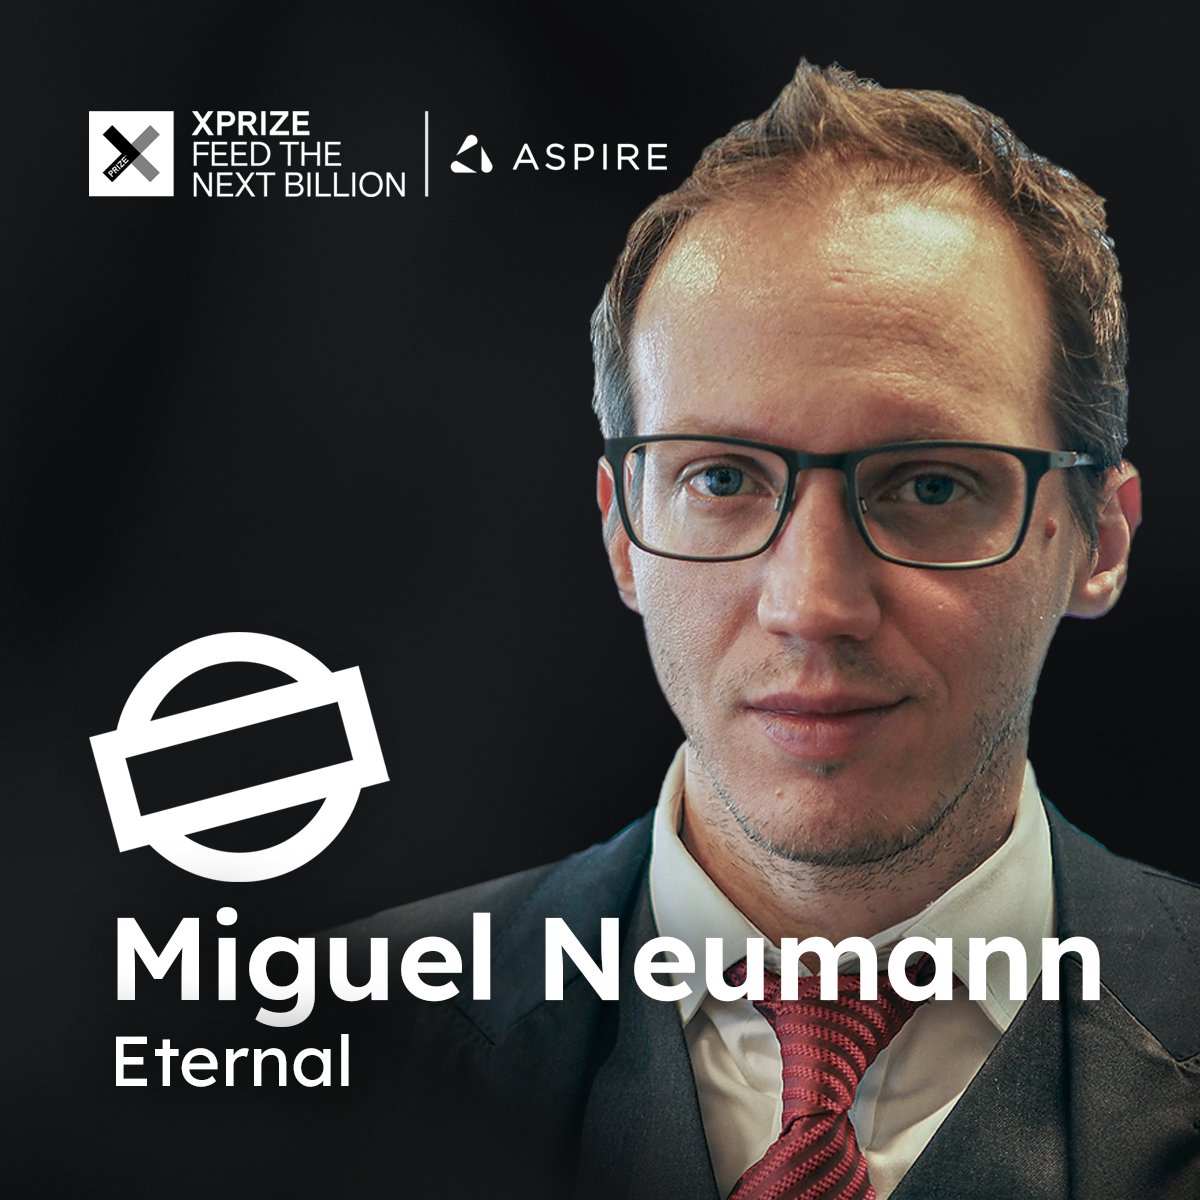 Miguel Neumann, interim CEO of #XPRIZEFeedTheNextBillion finalist team @EternalBio, chatted with @AlexShirazi about the future of food. Check out the new episode of @FutureFoodShow’s Transforming The Future of Proteins series here. futurefoodshow.com/2023/05/25/mig…